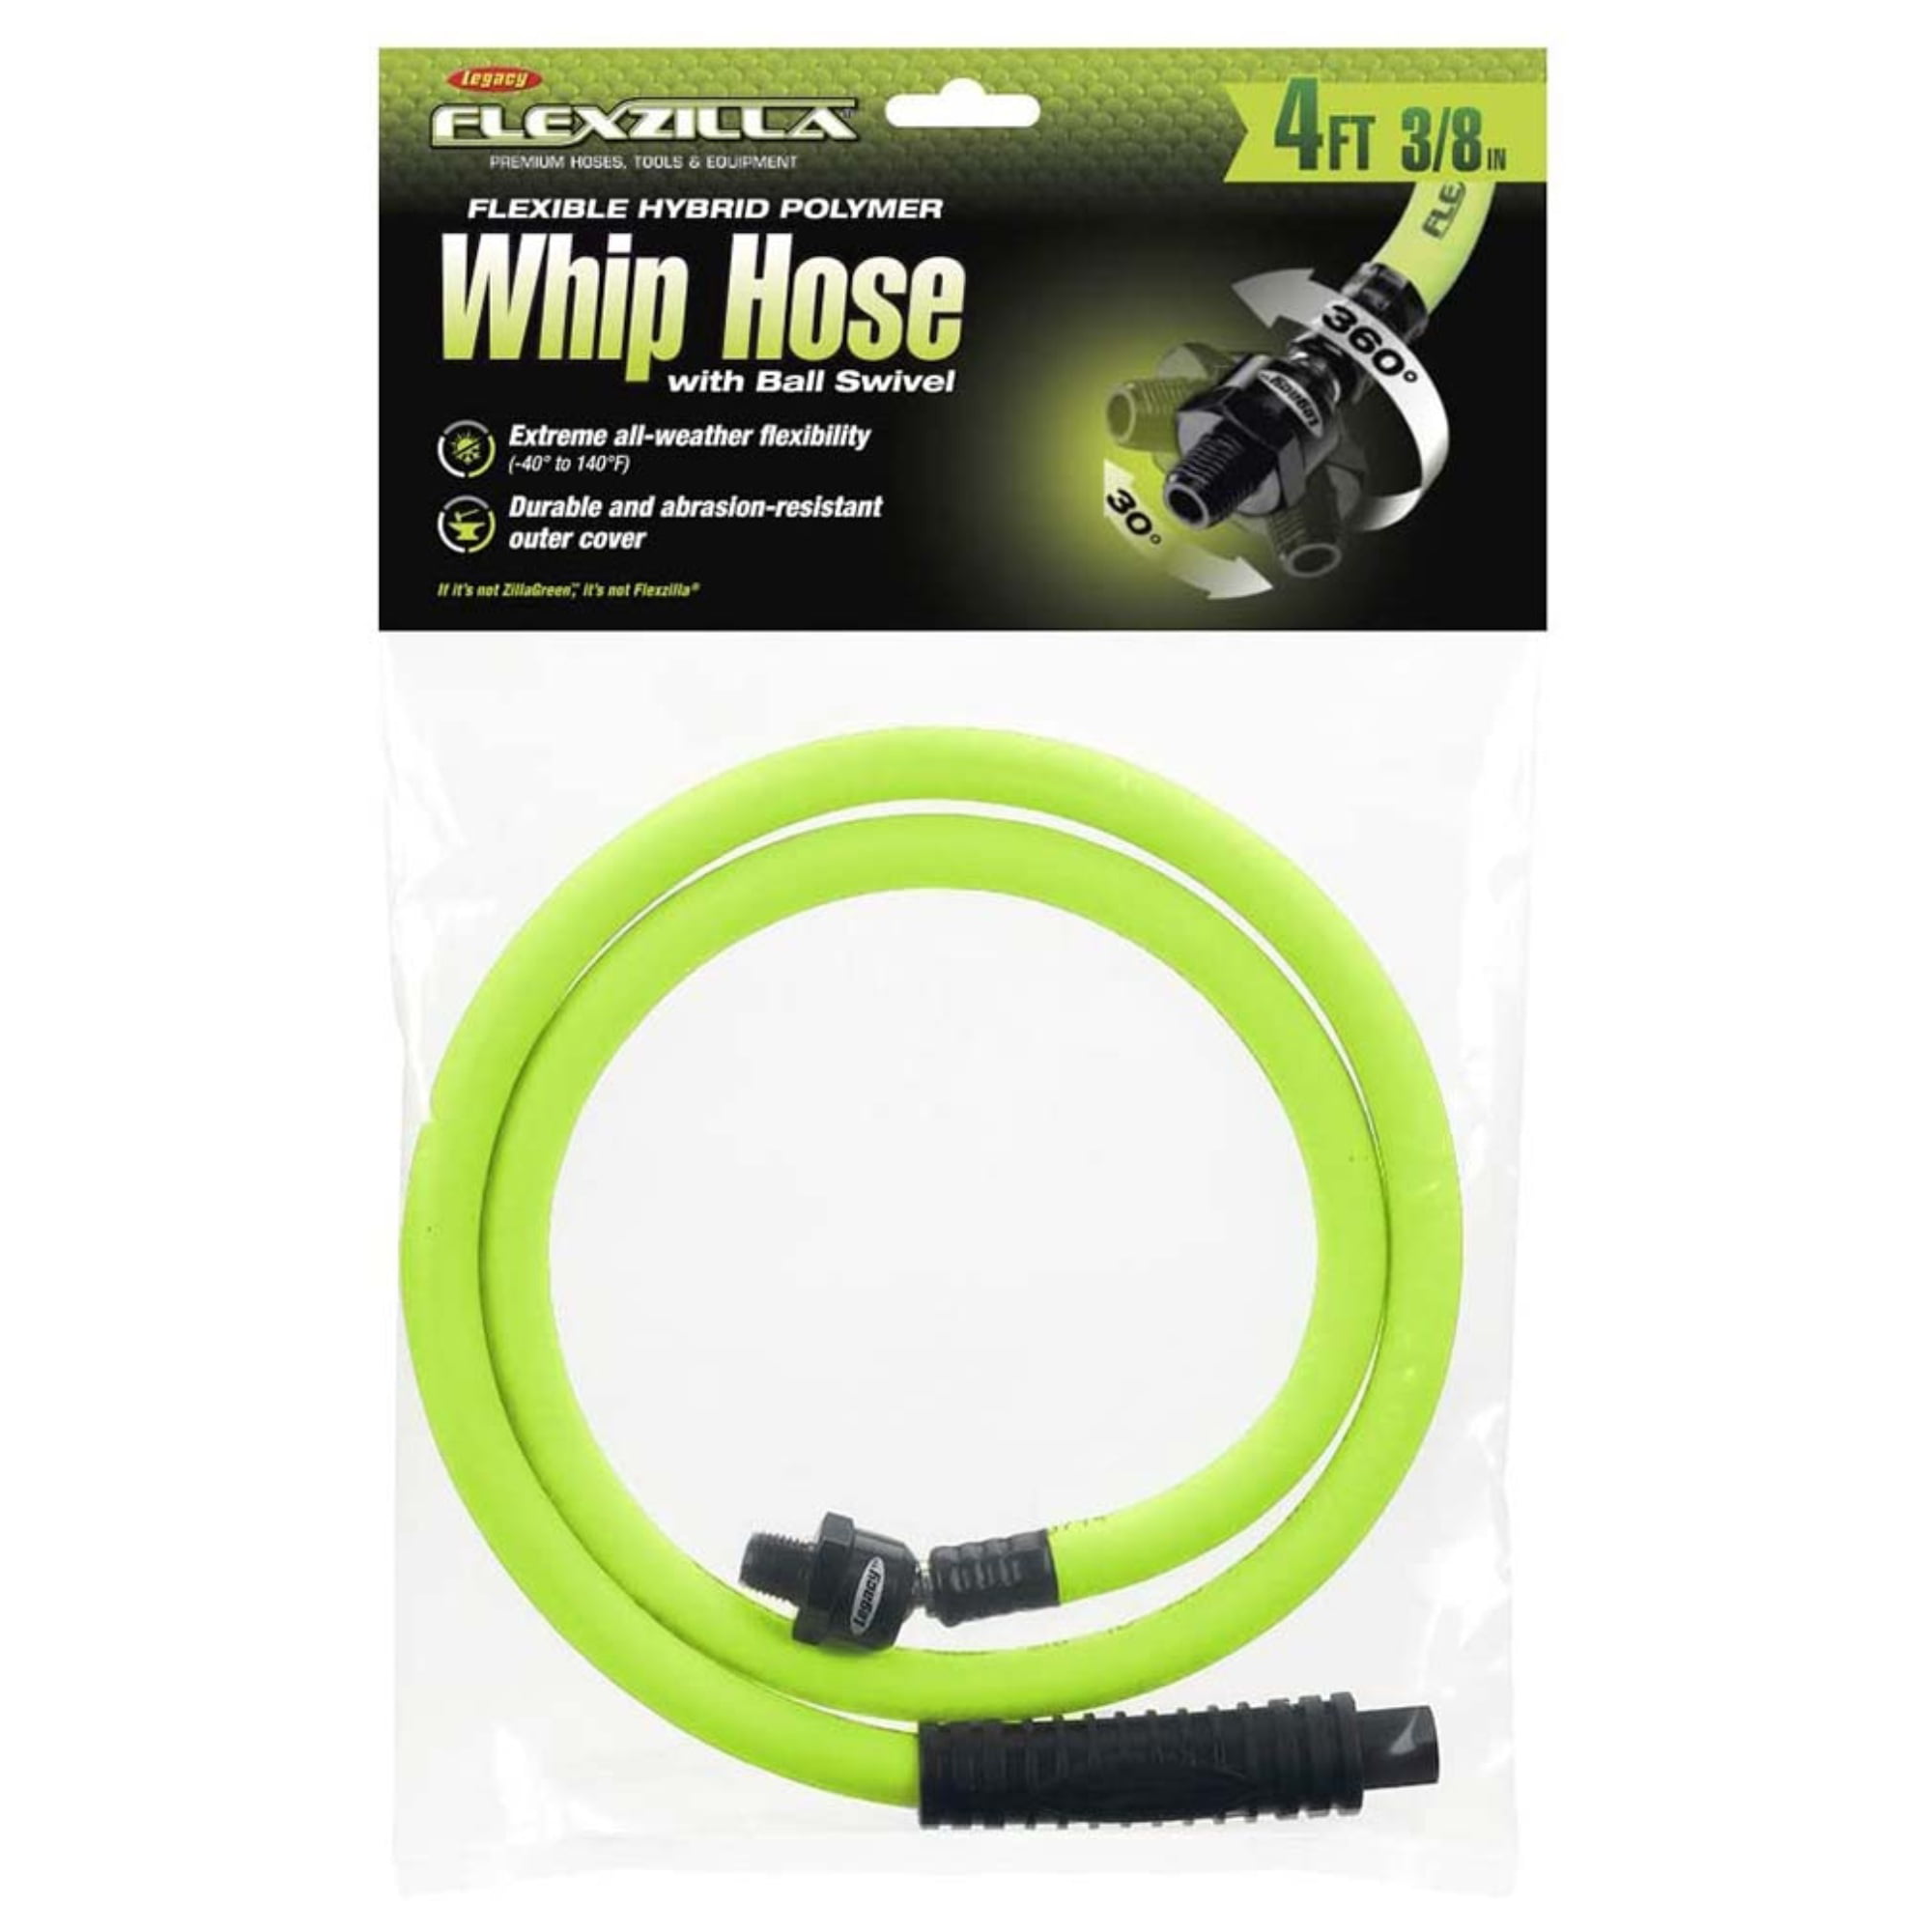 Details about   Flexzilla Whip Hose W/ Ball Swivel 1/4in X 5ft Hfz1405yw2b 